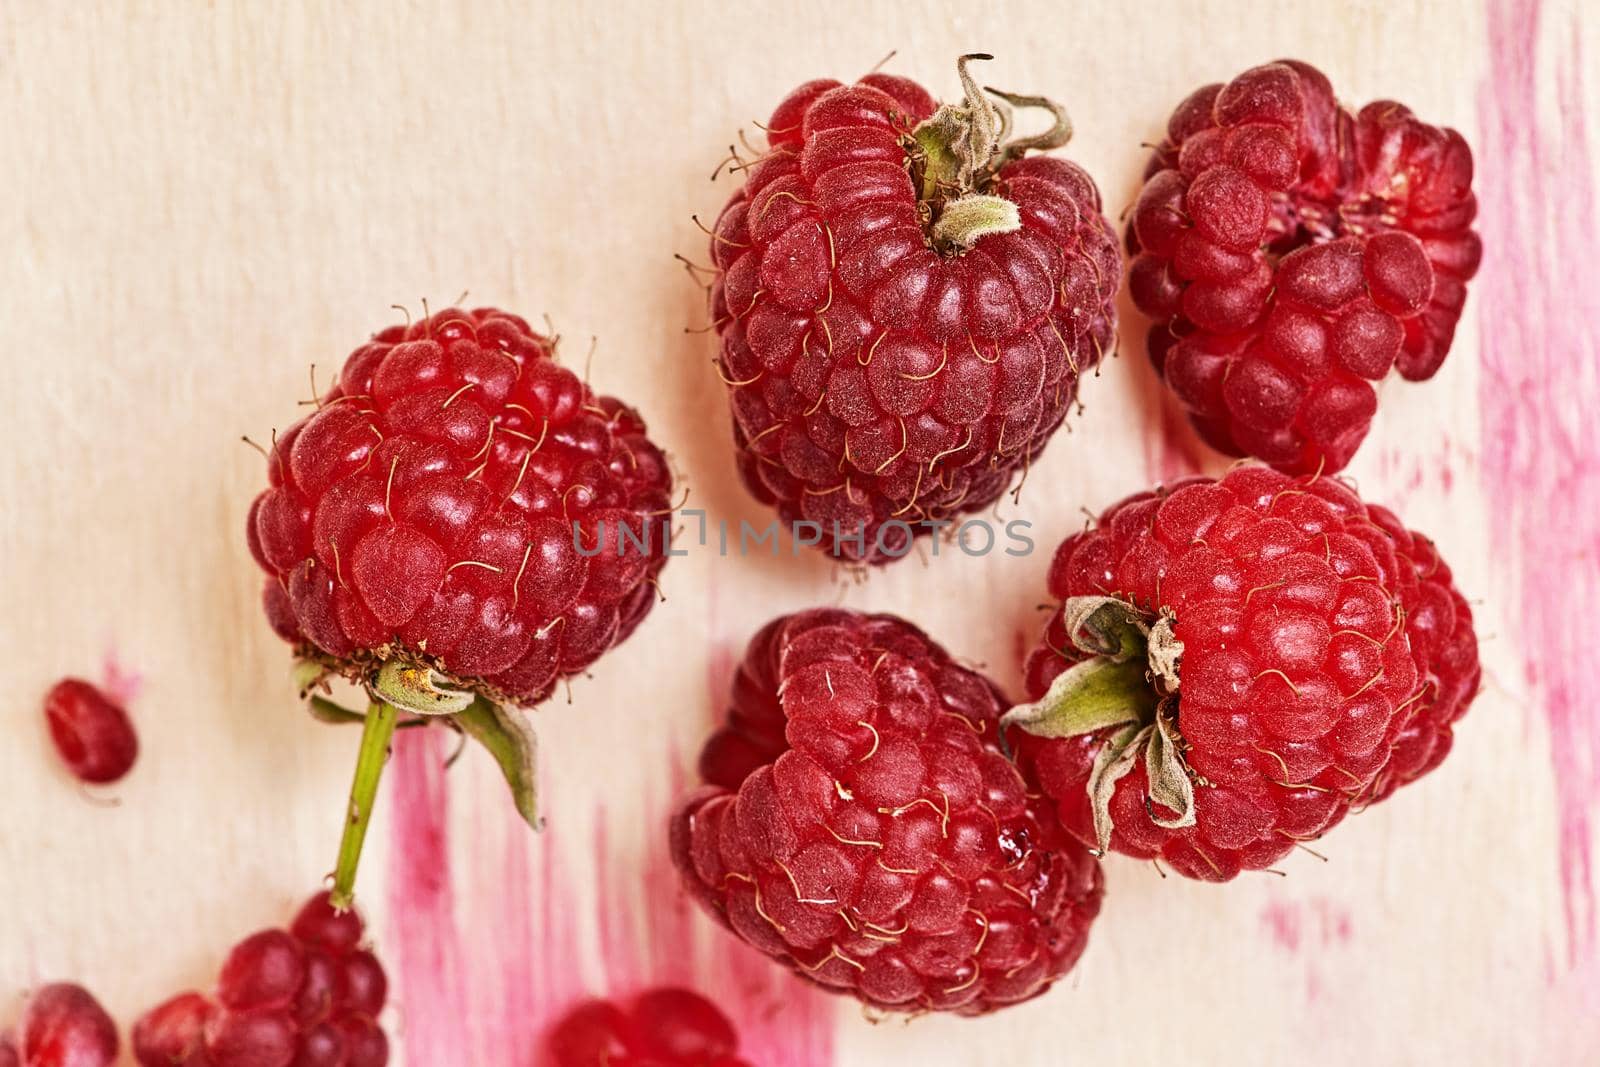 A fragment of a wooden container with ripe red raspberries and with juice stains from berries. Top view close up